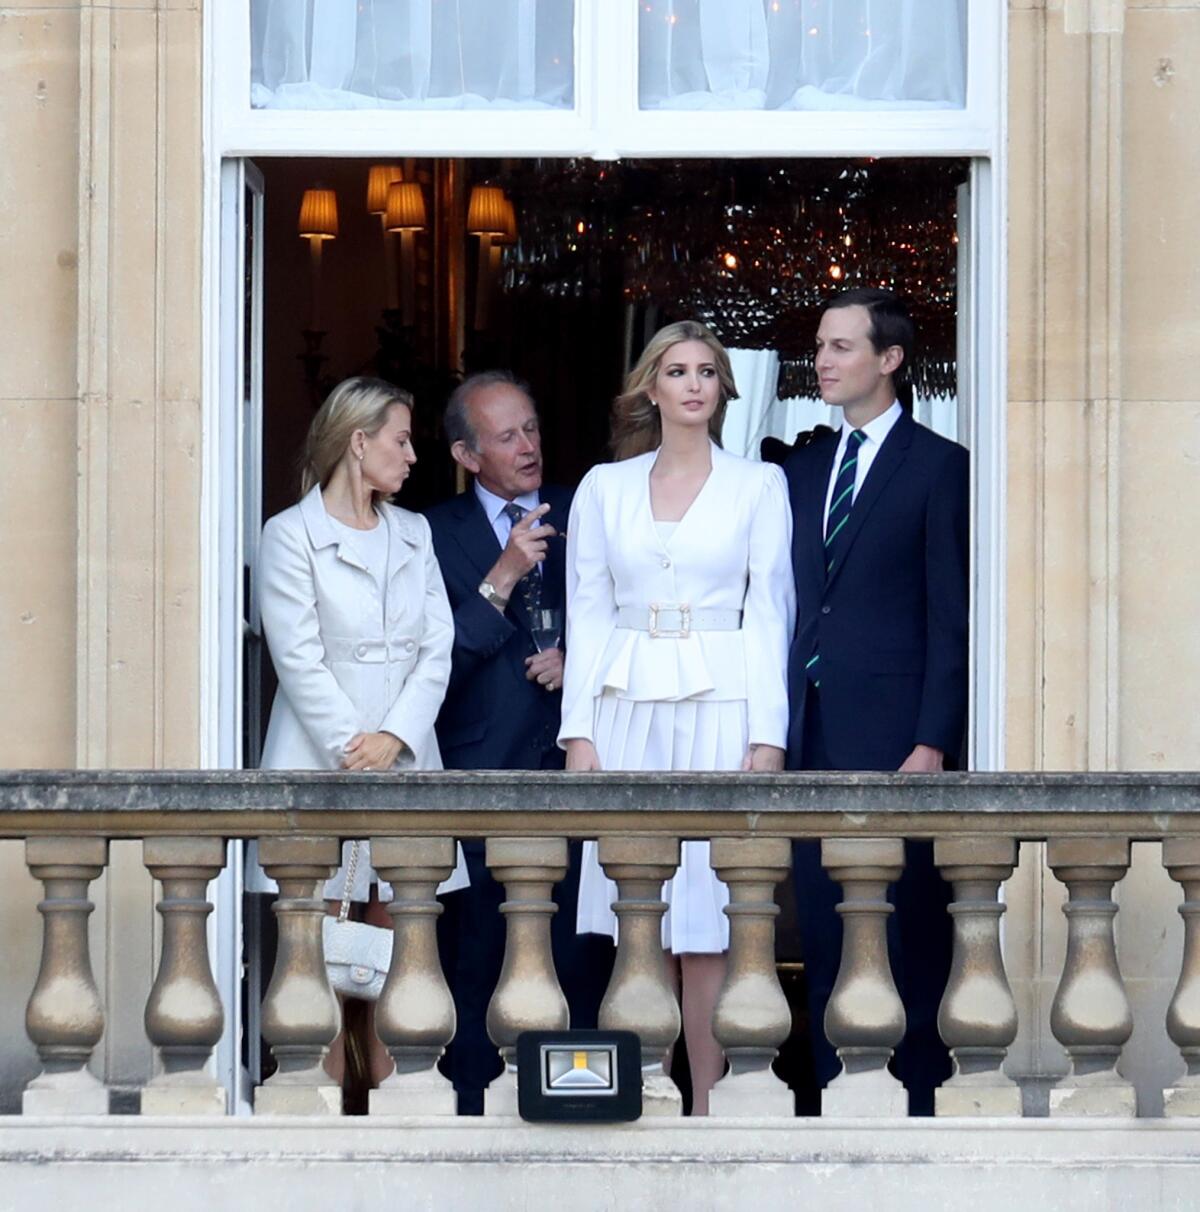 Ivanka Trump and Jared Kushner, right, look out of a window at Buckingham Palace during the visit of President Trump and First Lady Melania Trump on June 3, 2019.